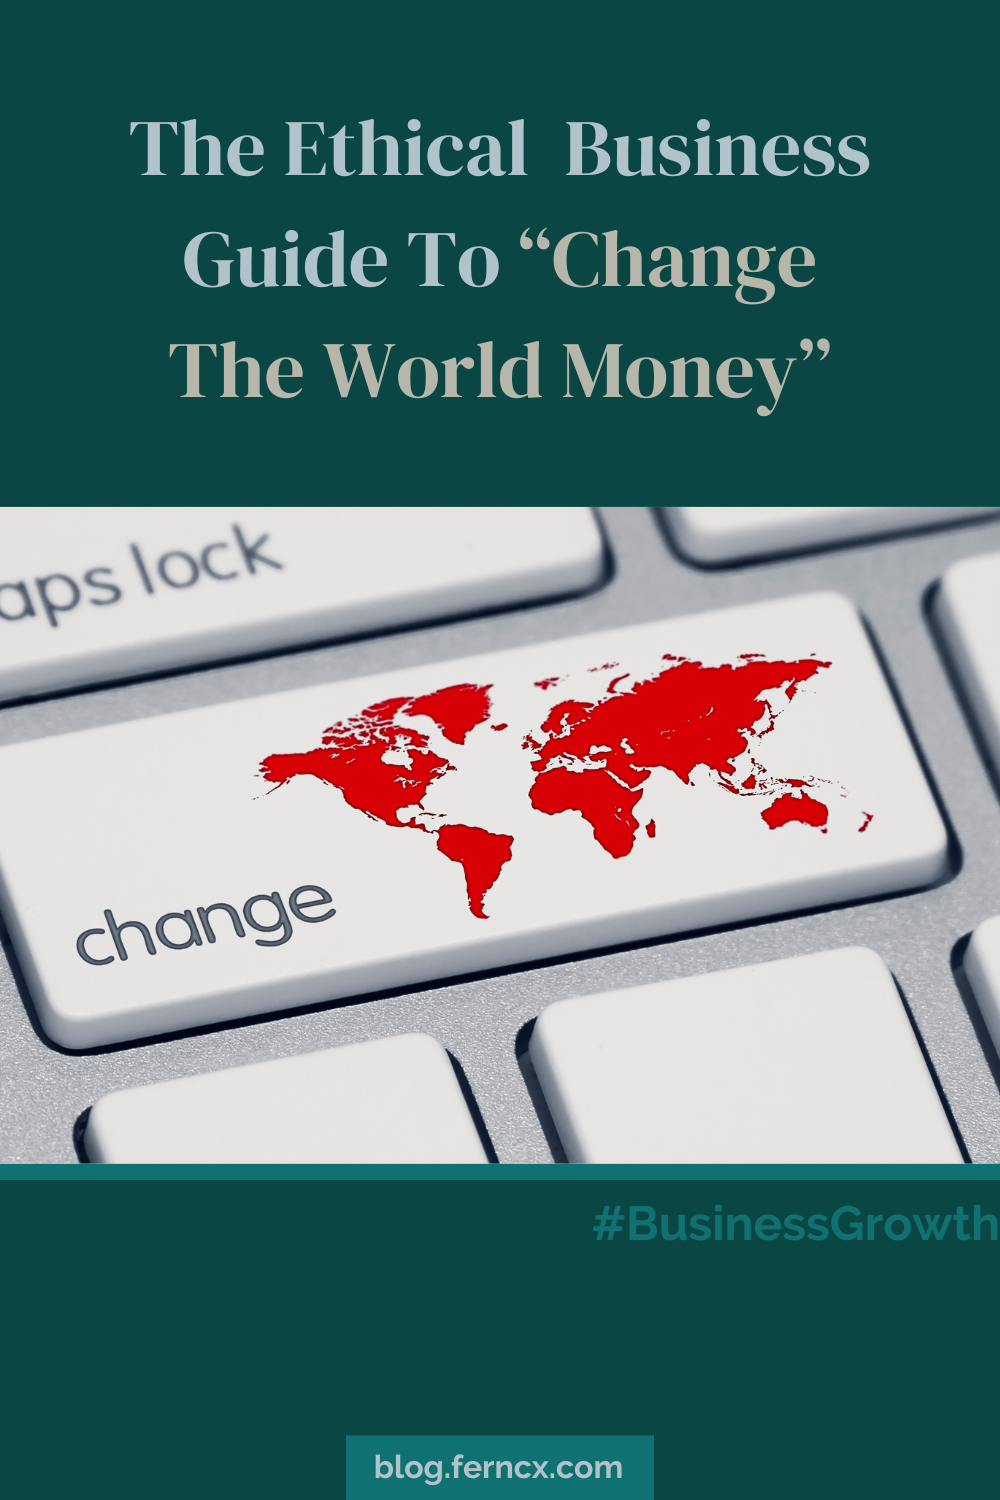 Silver text on green background that says, The Ethical Business Guide To Change The World Money and the hashtag Business Growth with a closeup photo of a computer keyboard showing the Caps Lock key and a Change key that includes a map of the world.